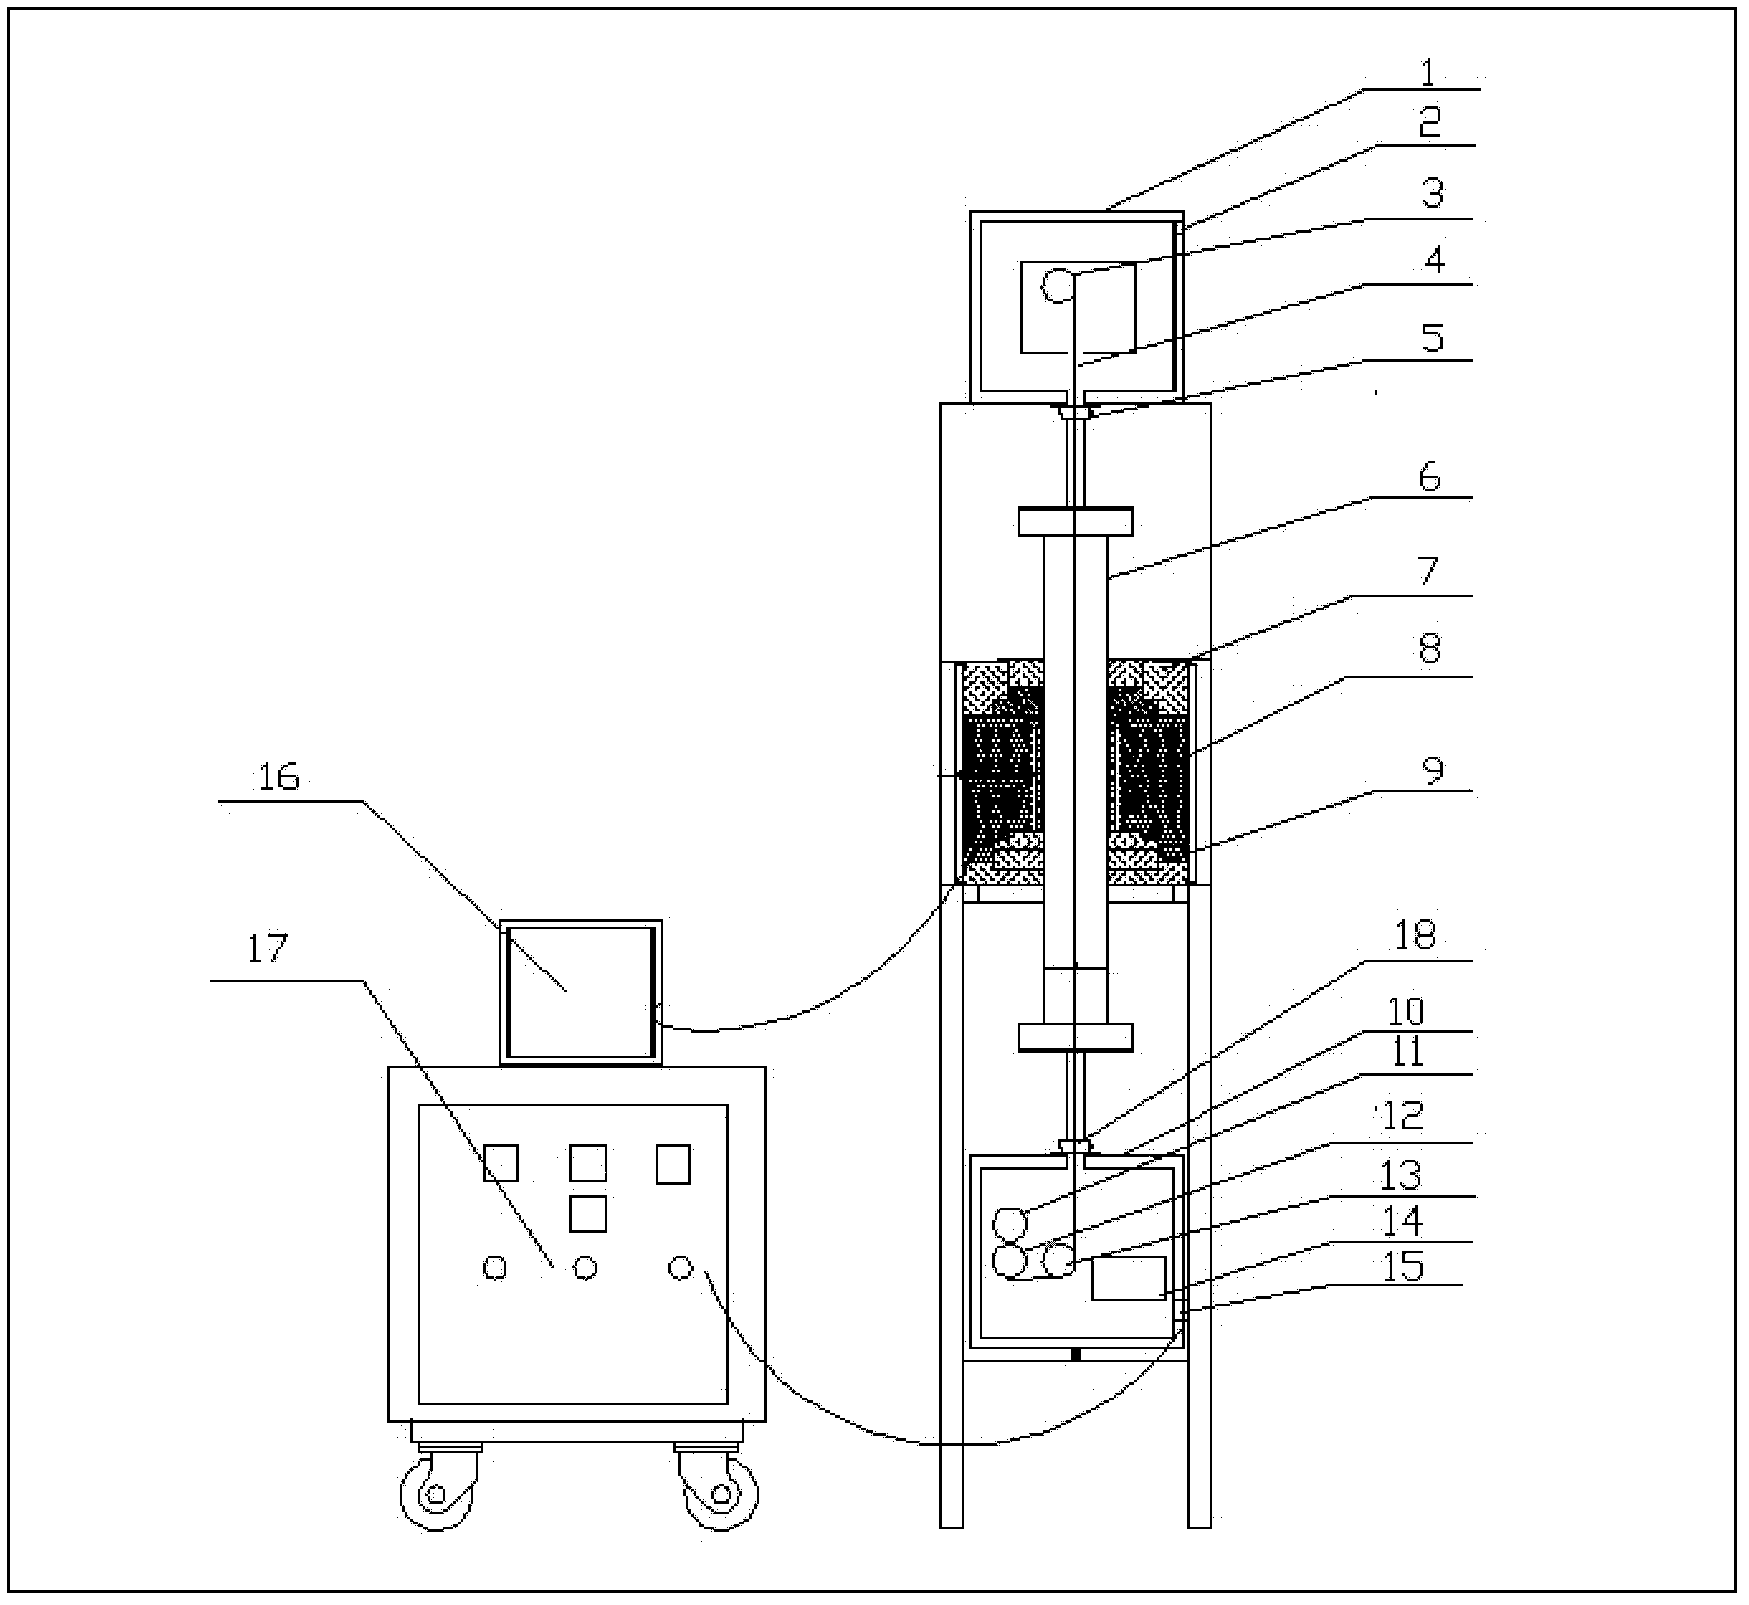 Vertical annealing furnace for coated superconducting substrate